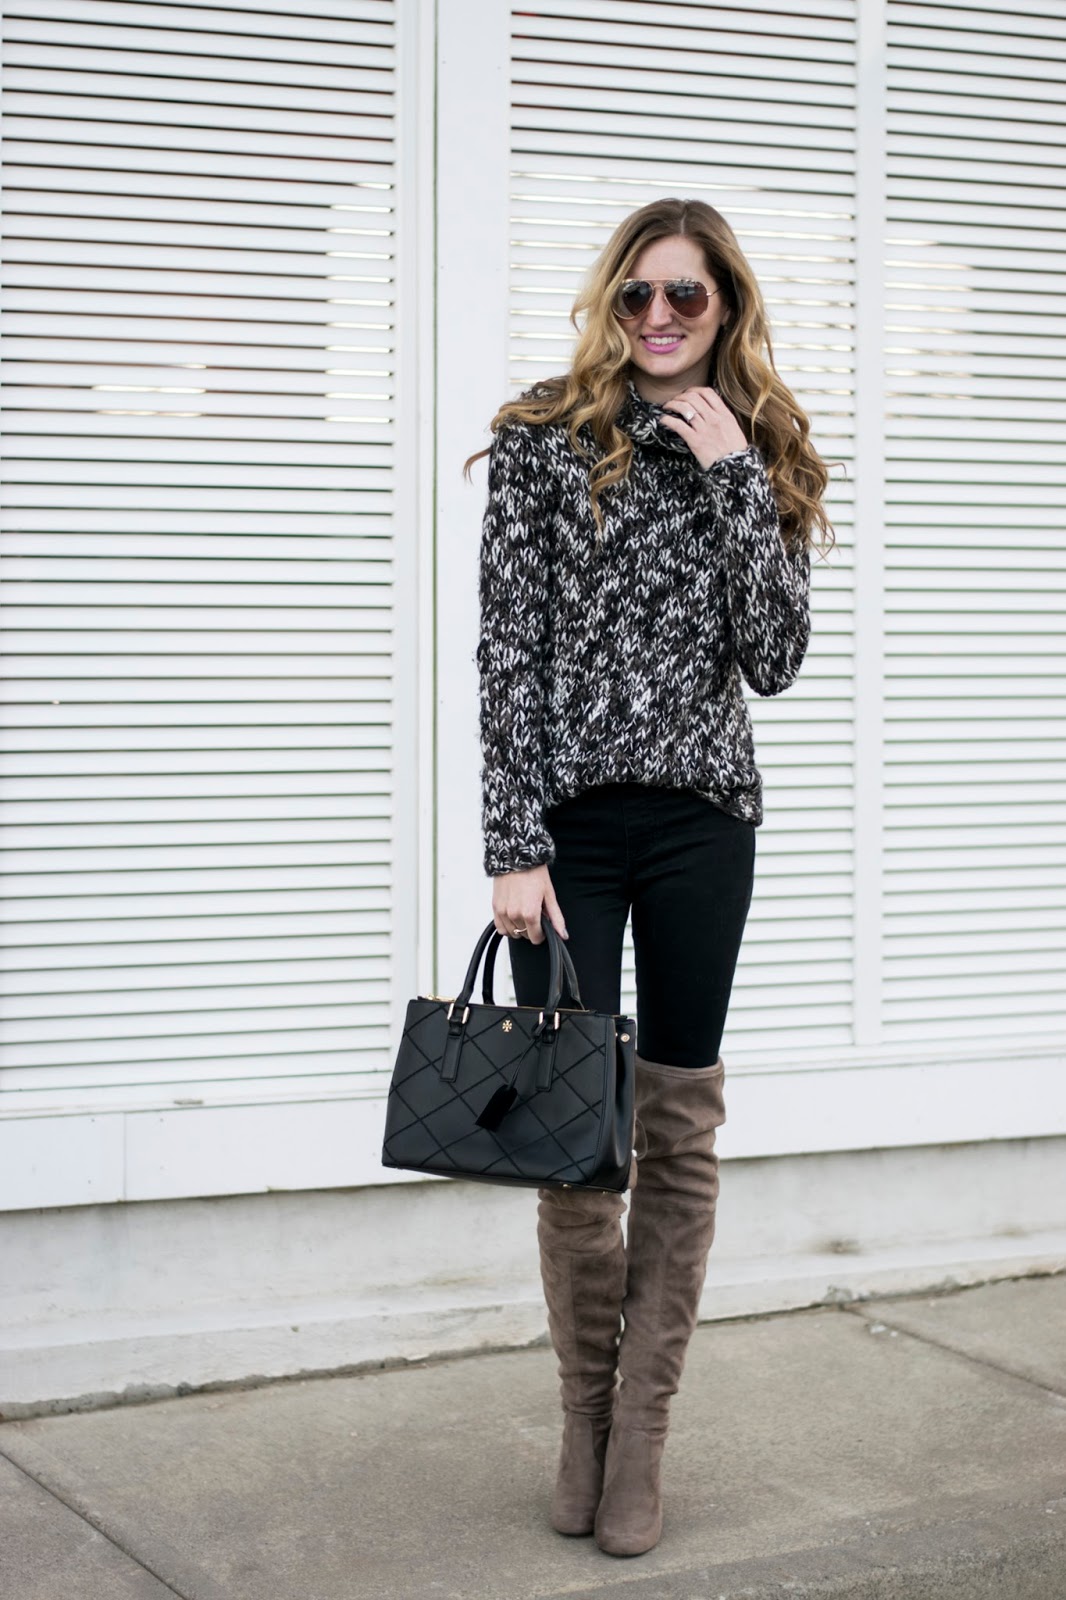 Chunky Knit Sweaters & Over the Knee Boots